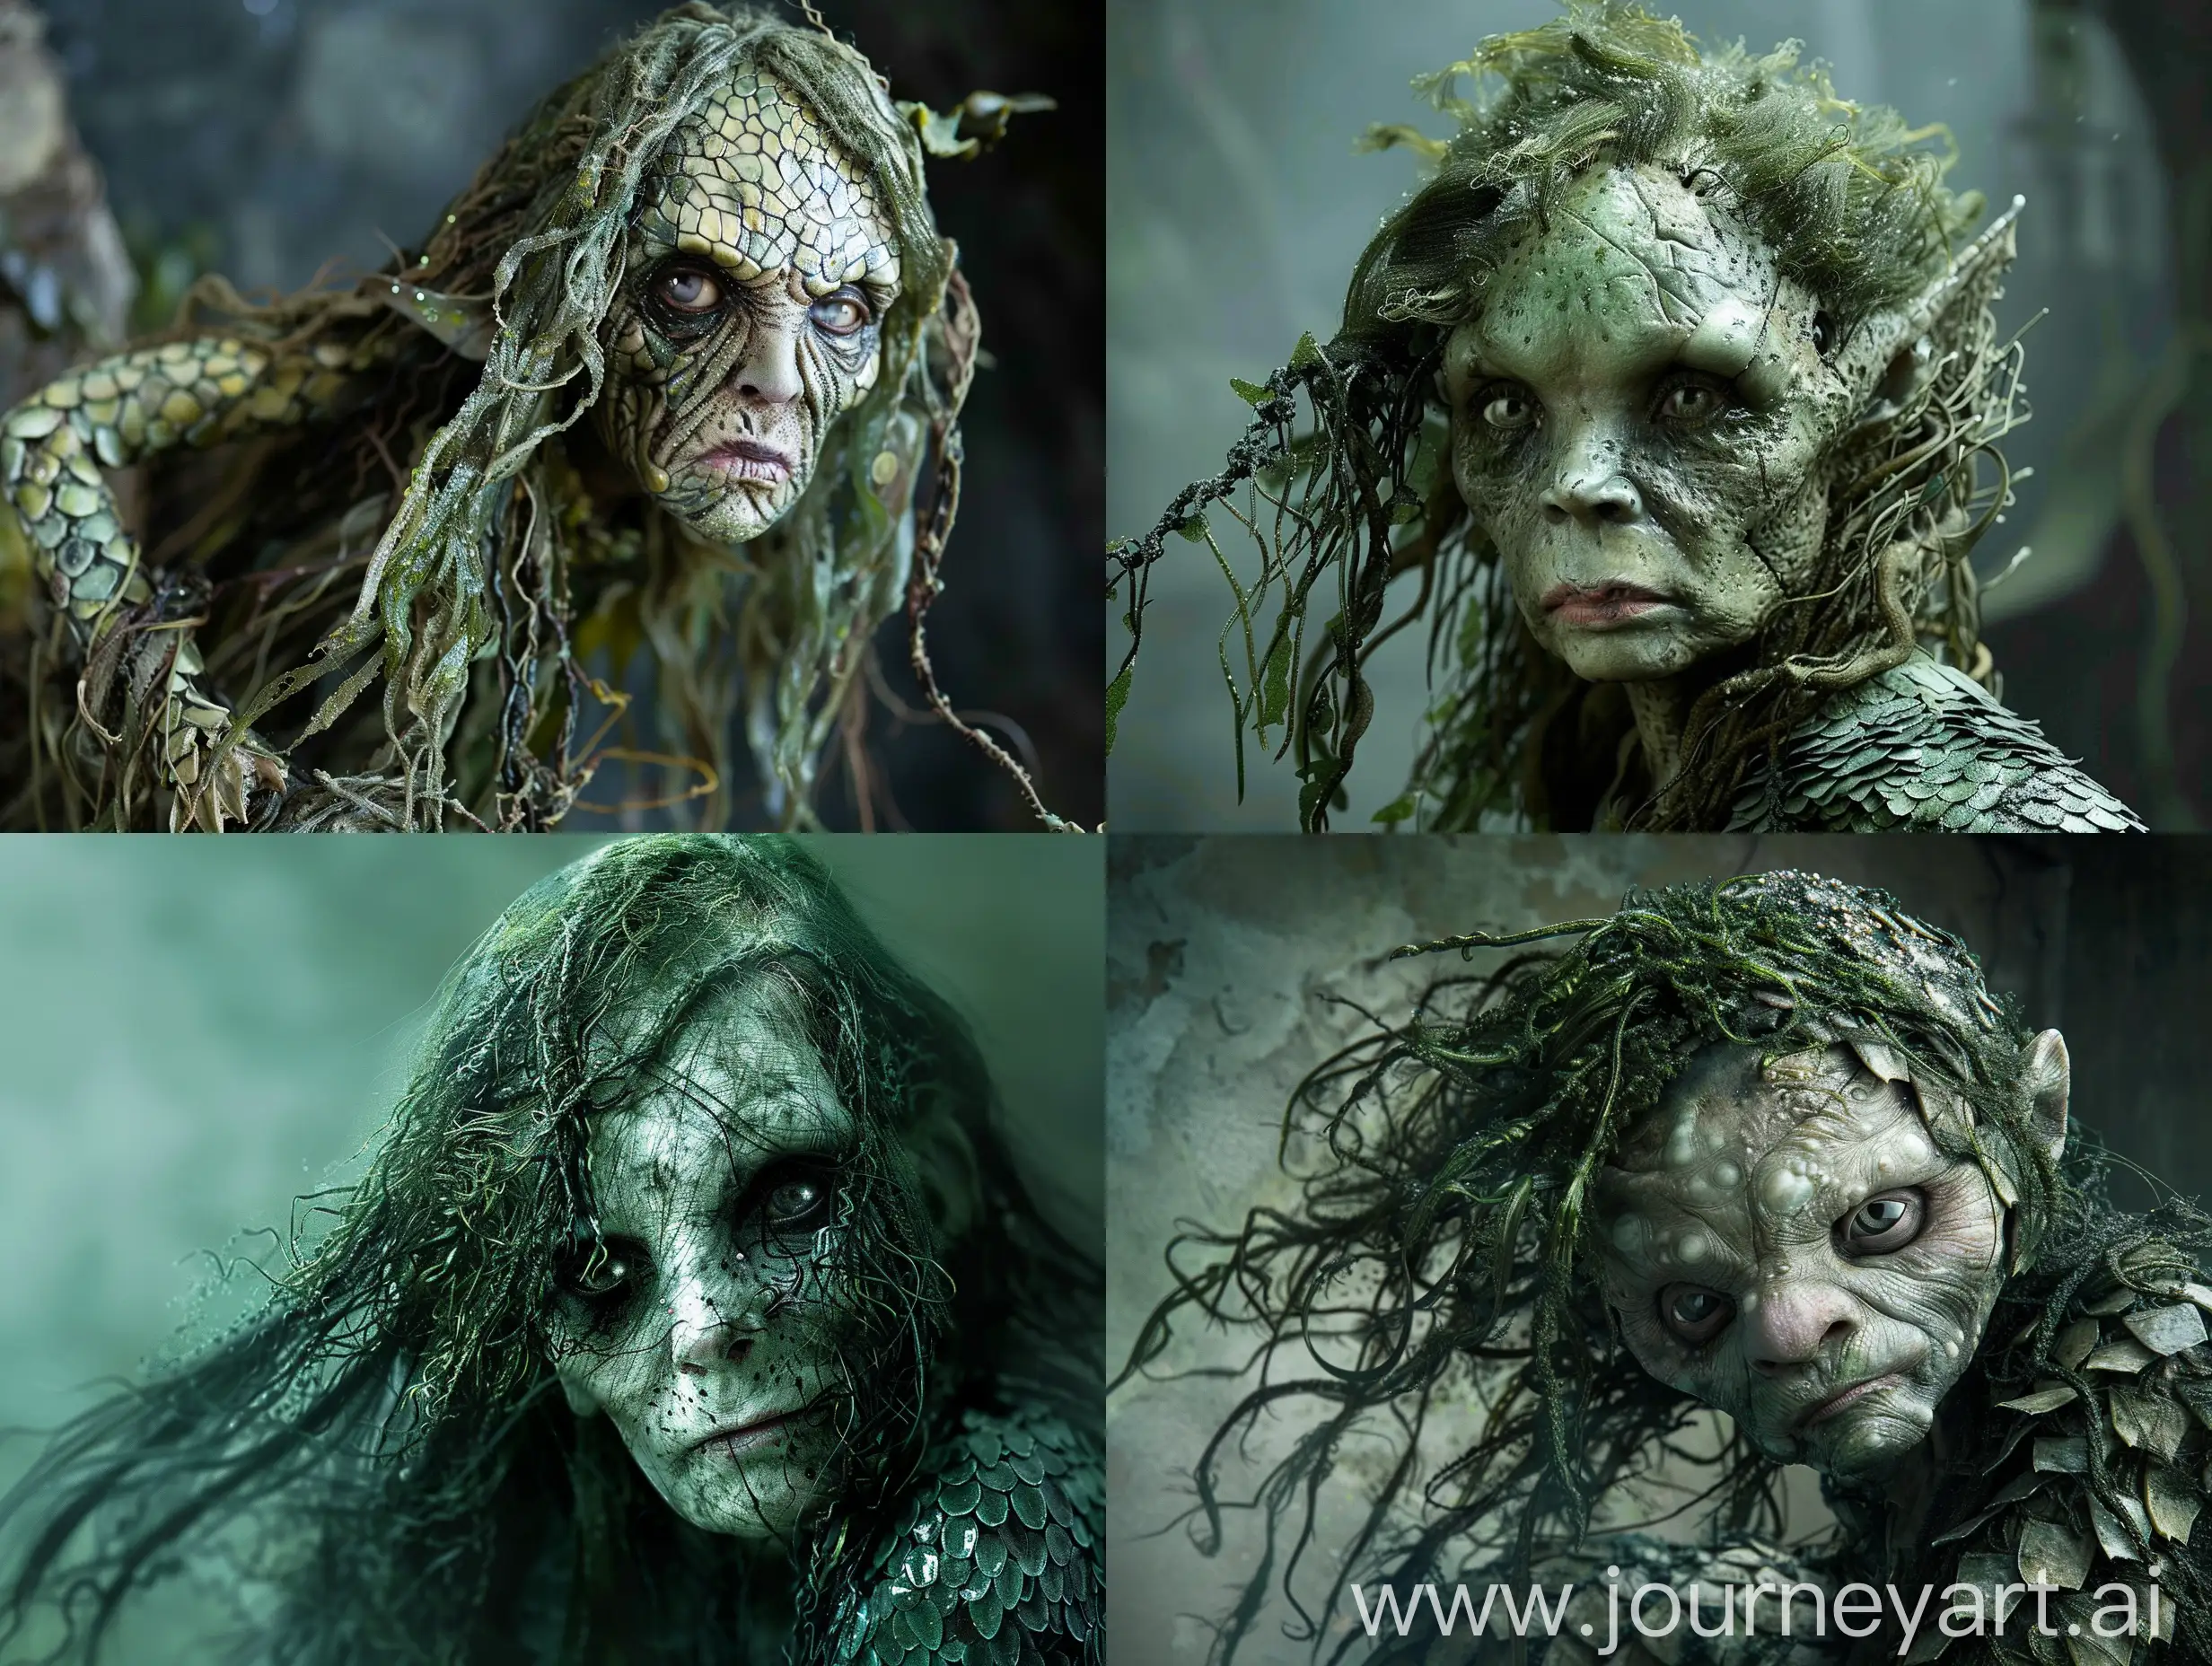 The ugliest of all hags, with slimy scales covering their pallid skin, hair resembling seaweed that covers her emaciated body, and her glassy eyes seem as lifeless as a doll's.